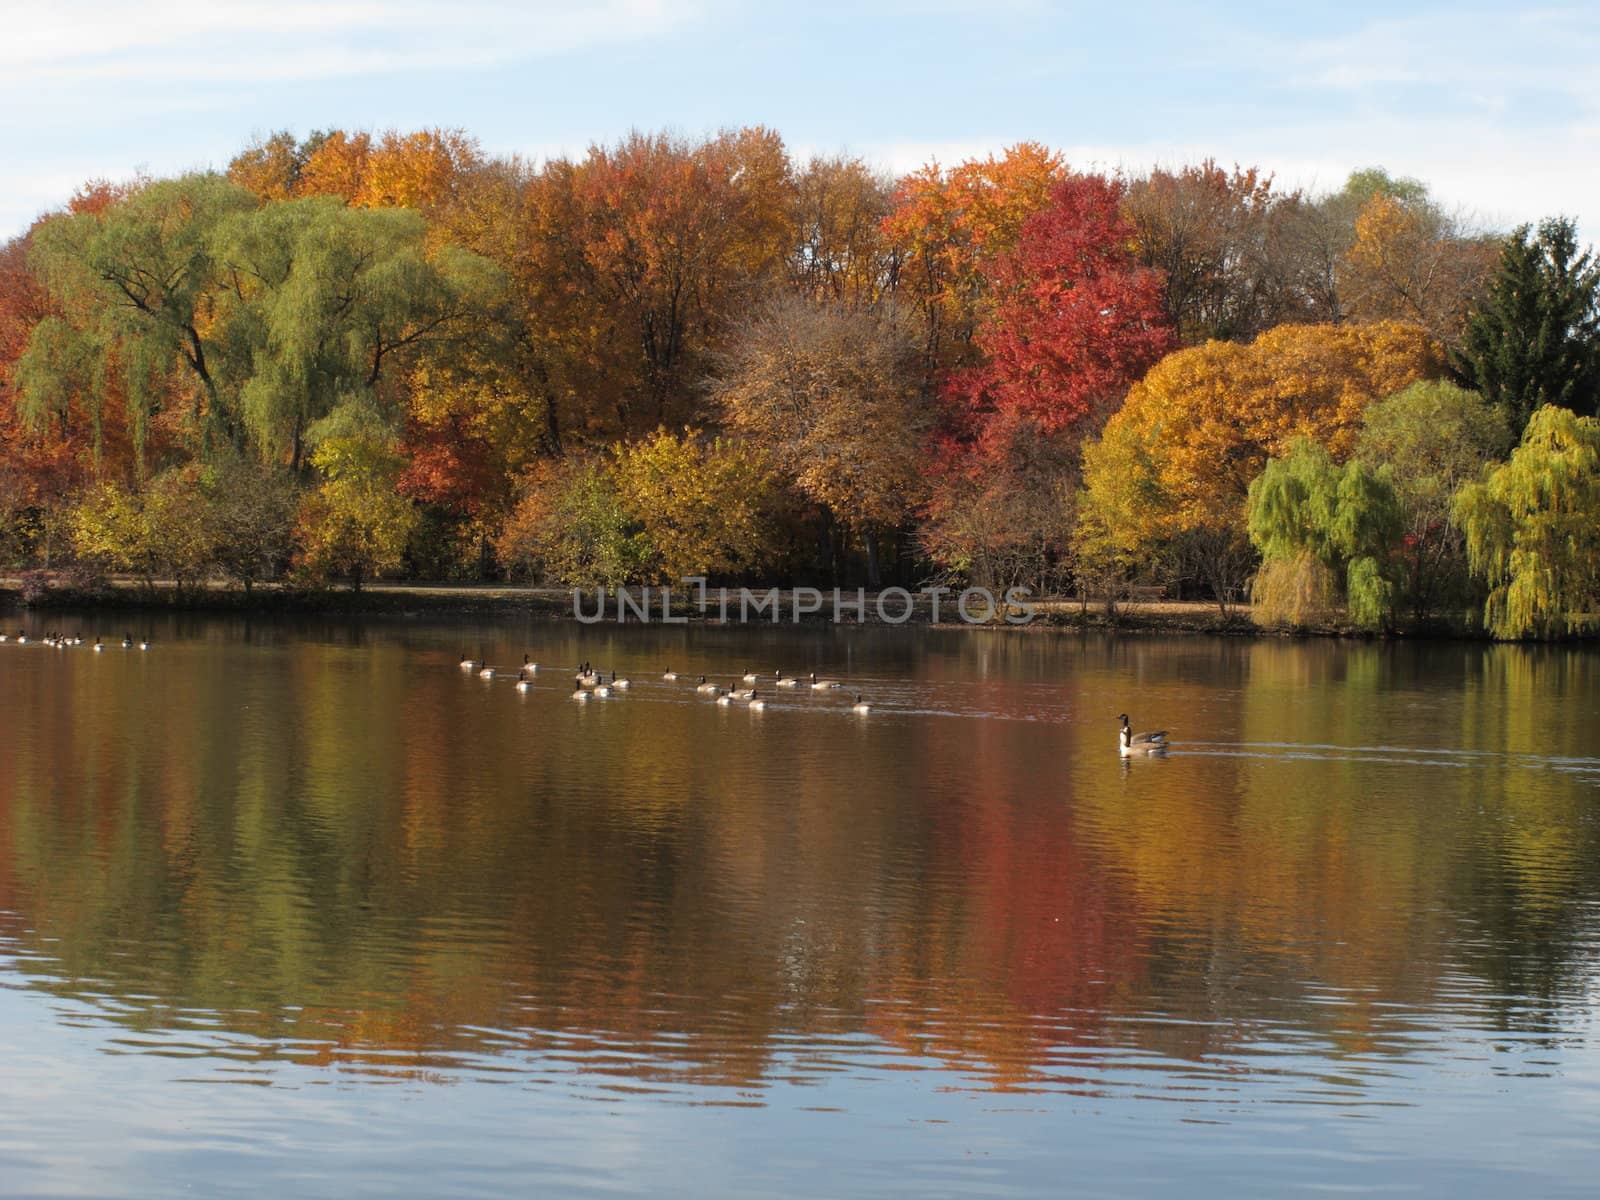 Fall Foliage and Pond by Ffooter